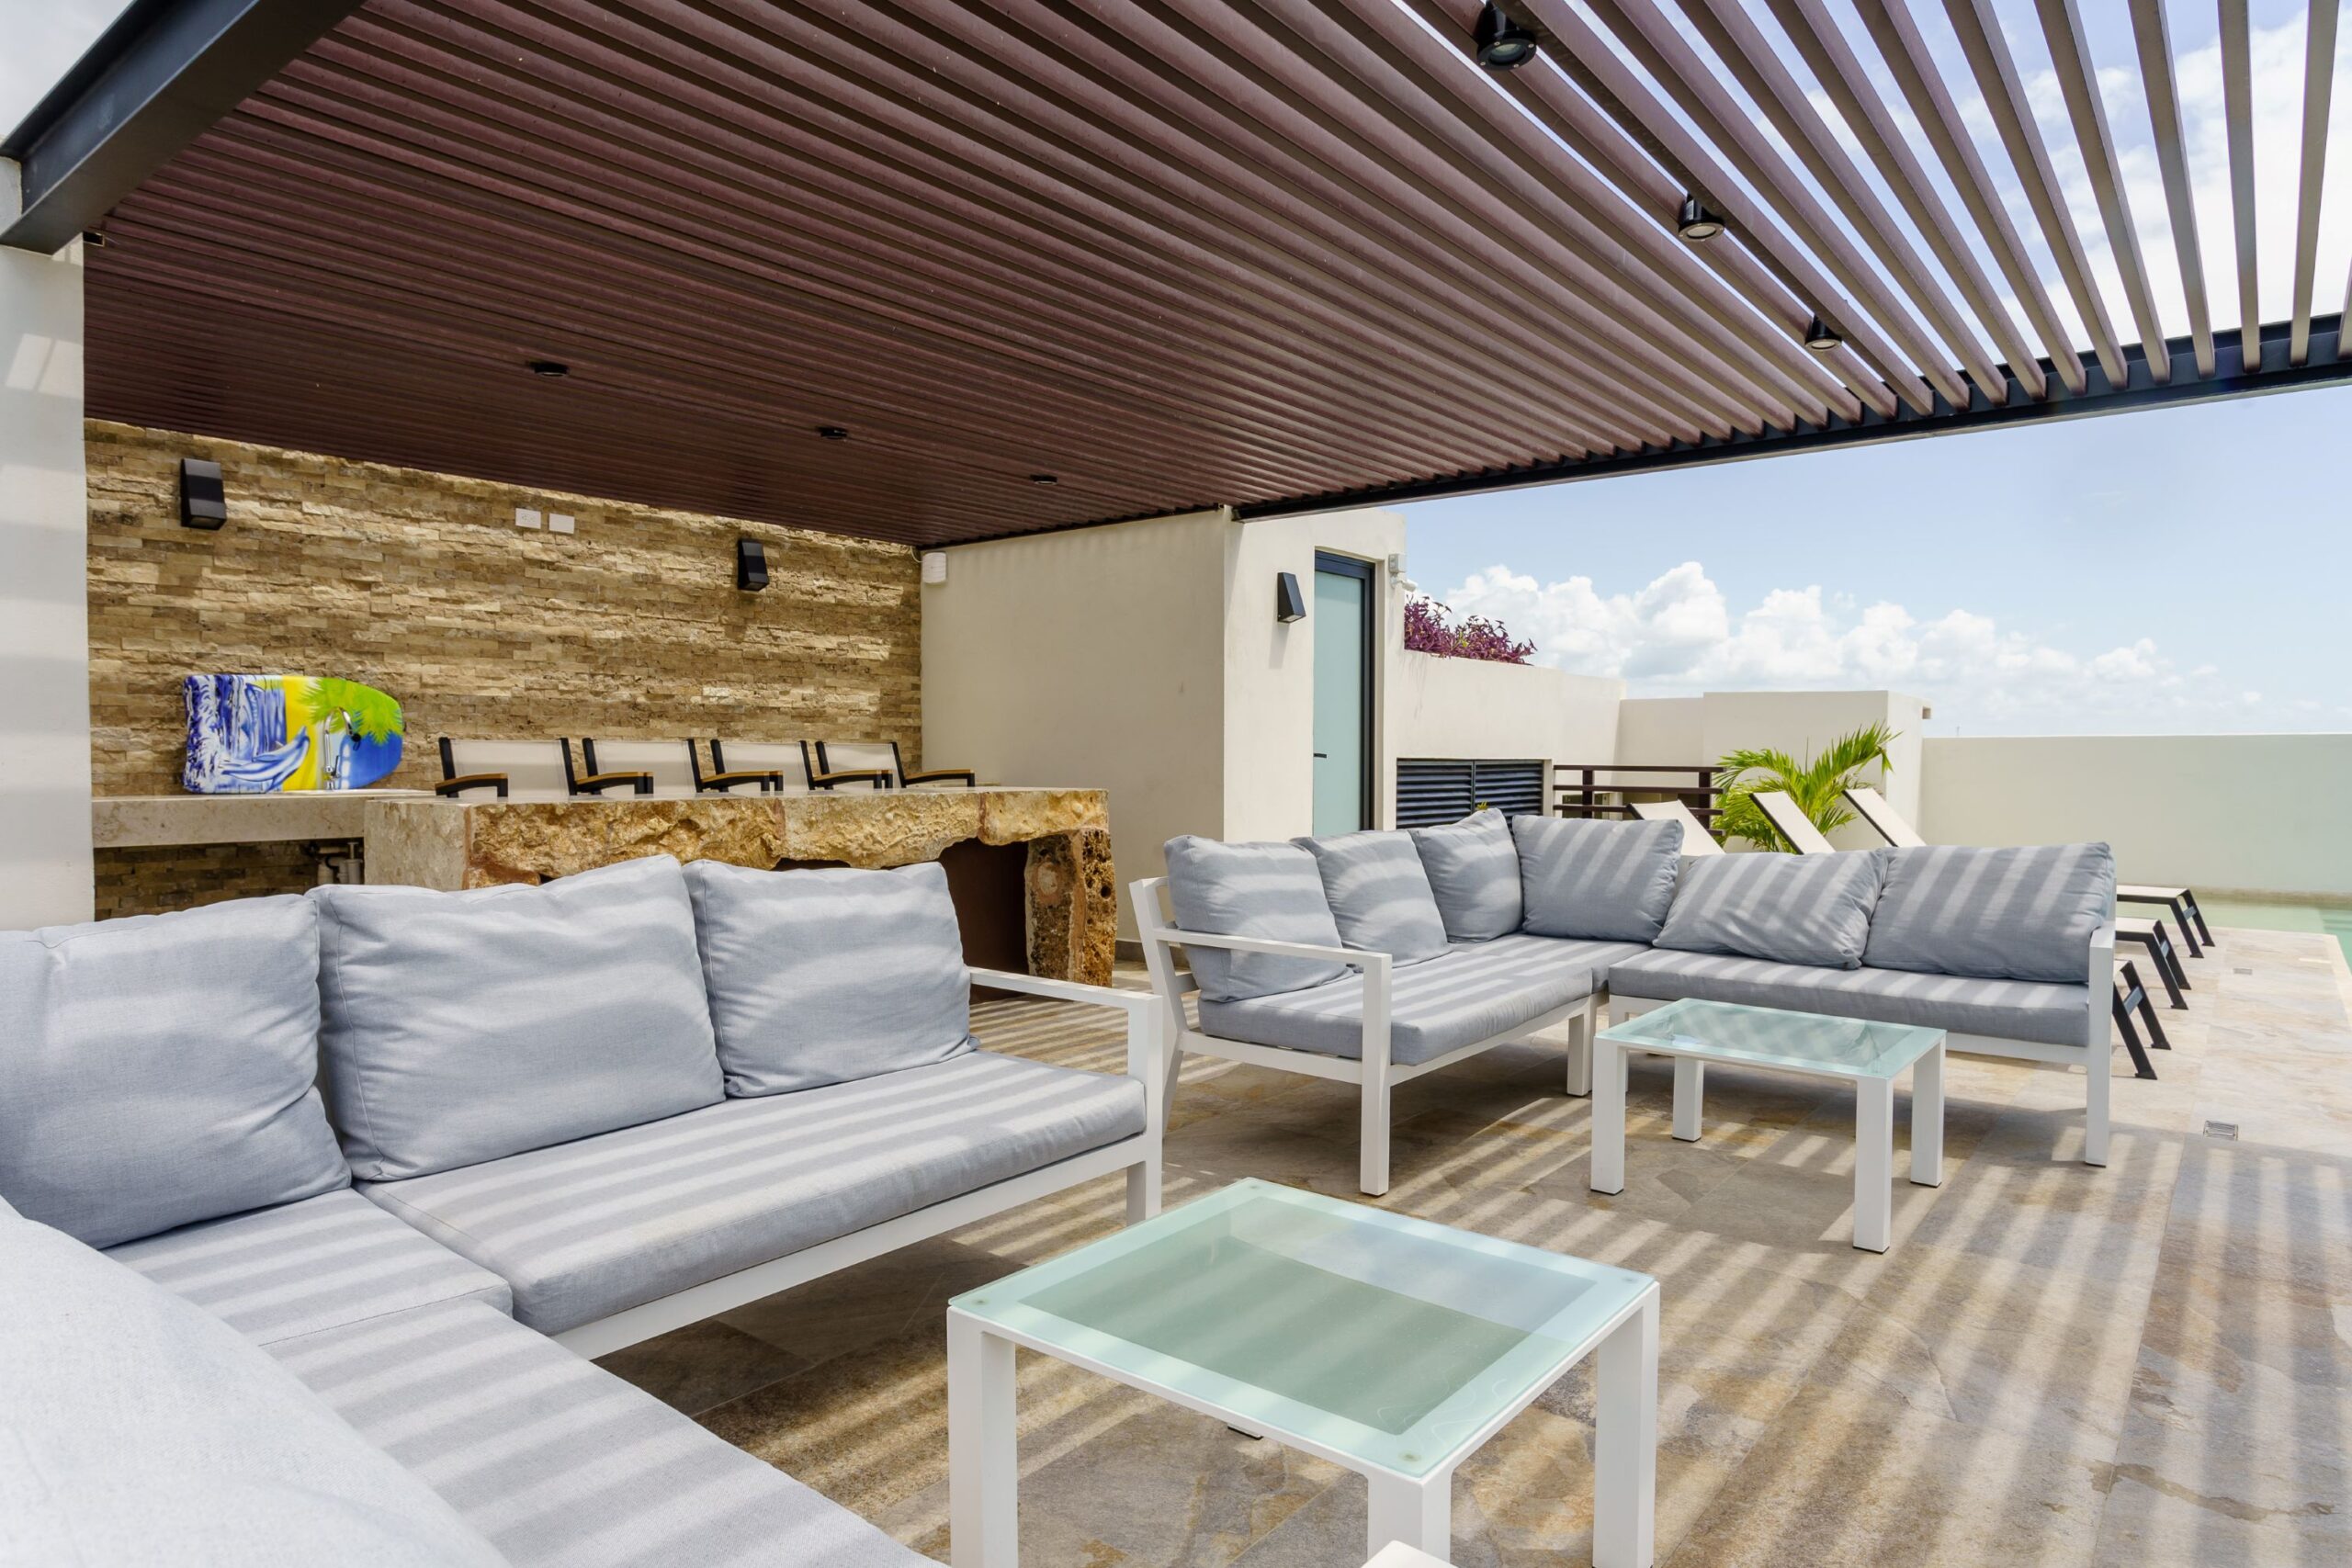 n playa del carmen mexico real estate penthouse arenis common area lounge